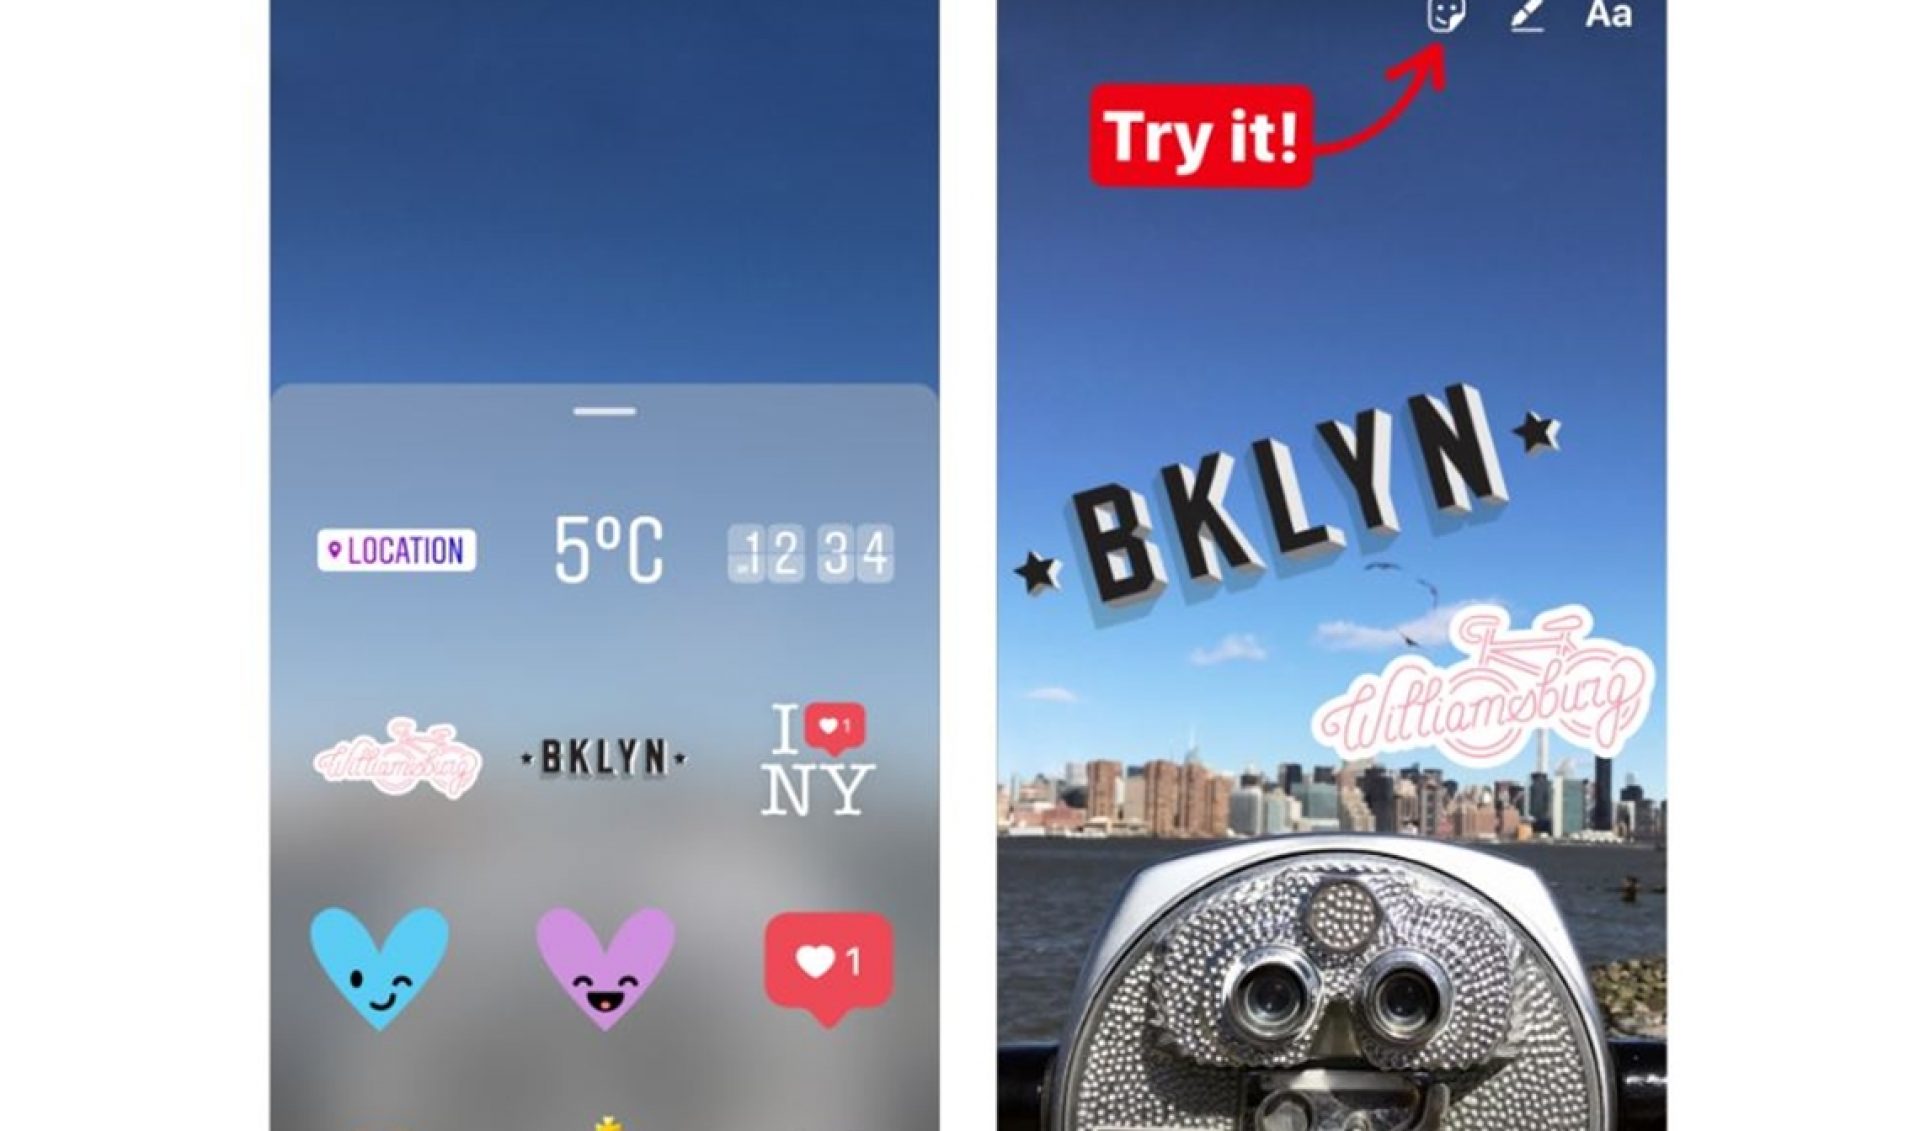 Instagram Stories Takes Snapchat Mimicry To New Heights With ‘Geostickers’